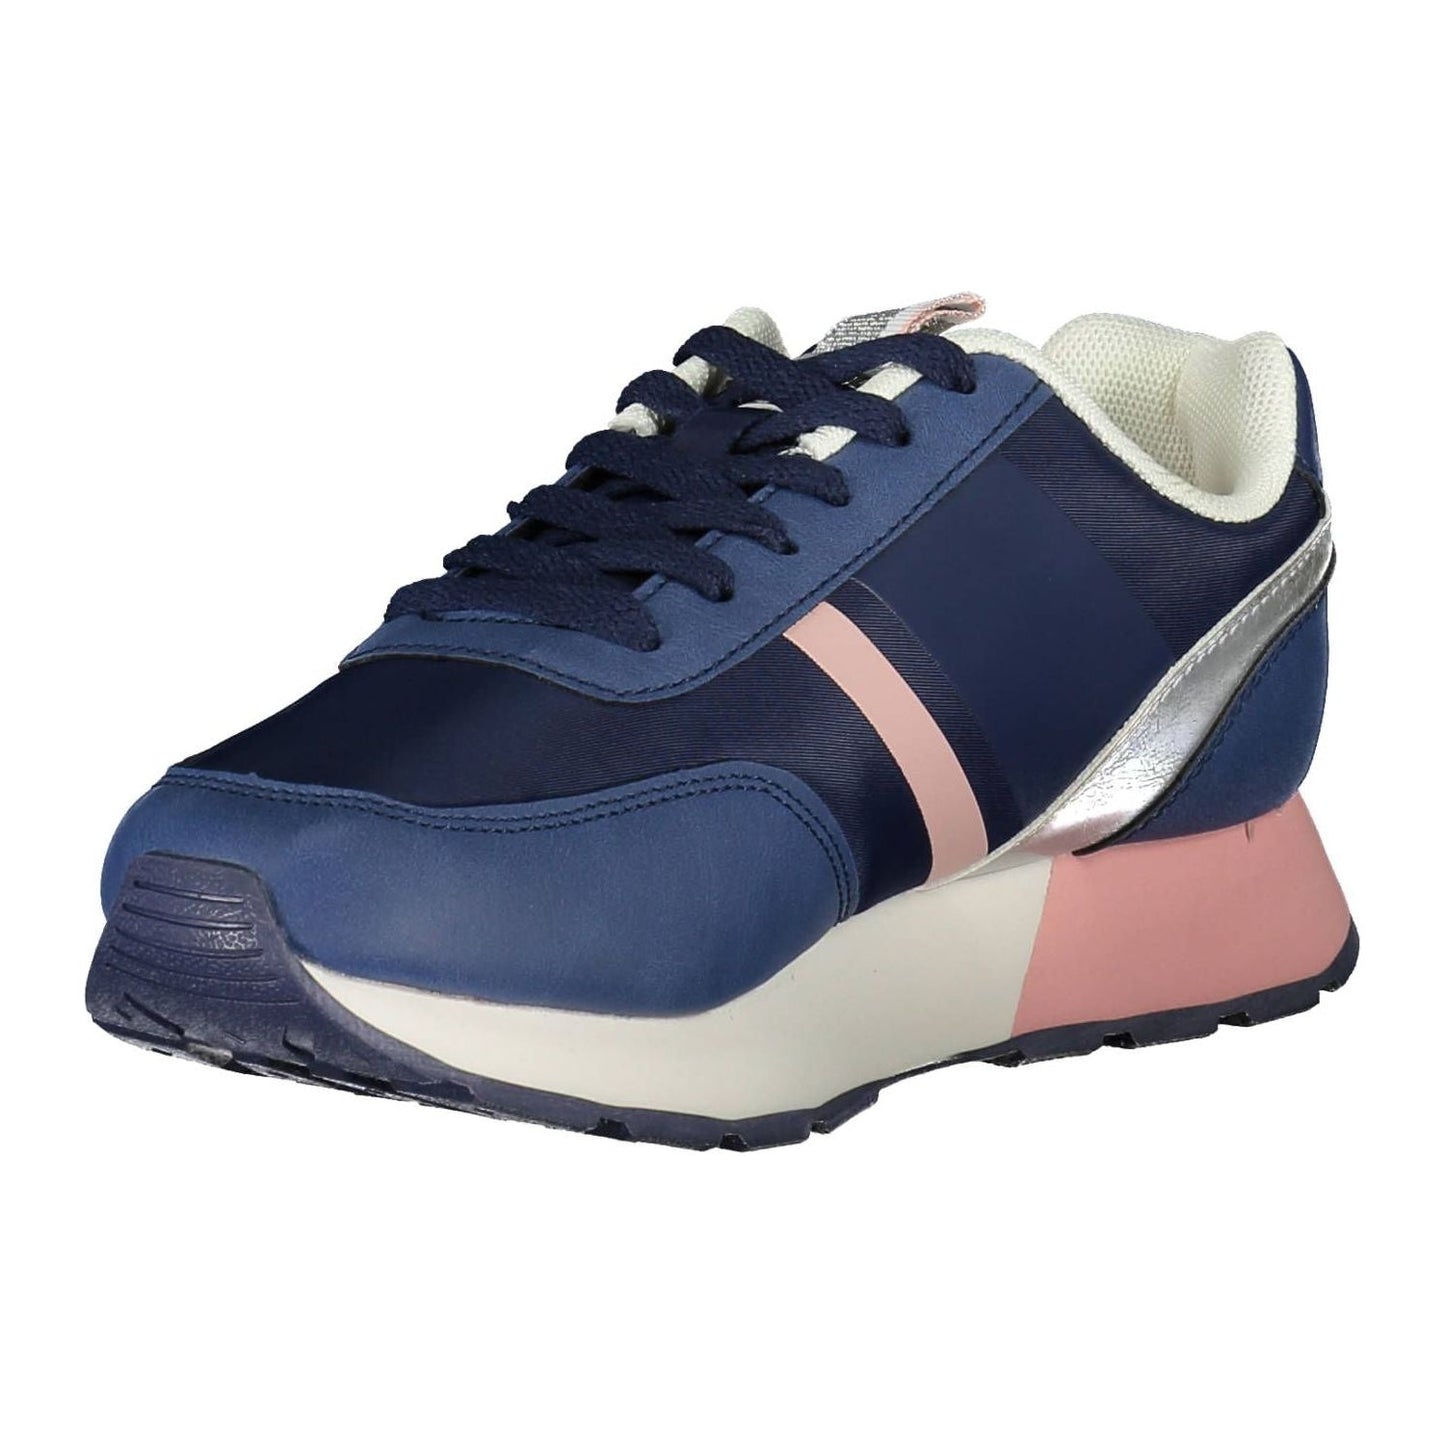 U.S. POLO ASSN.Chic Blue Lace-Up Sneakers with Logo AccentMcRichard Designer Brands£89.00